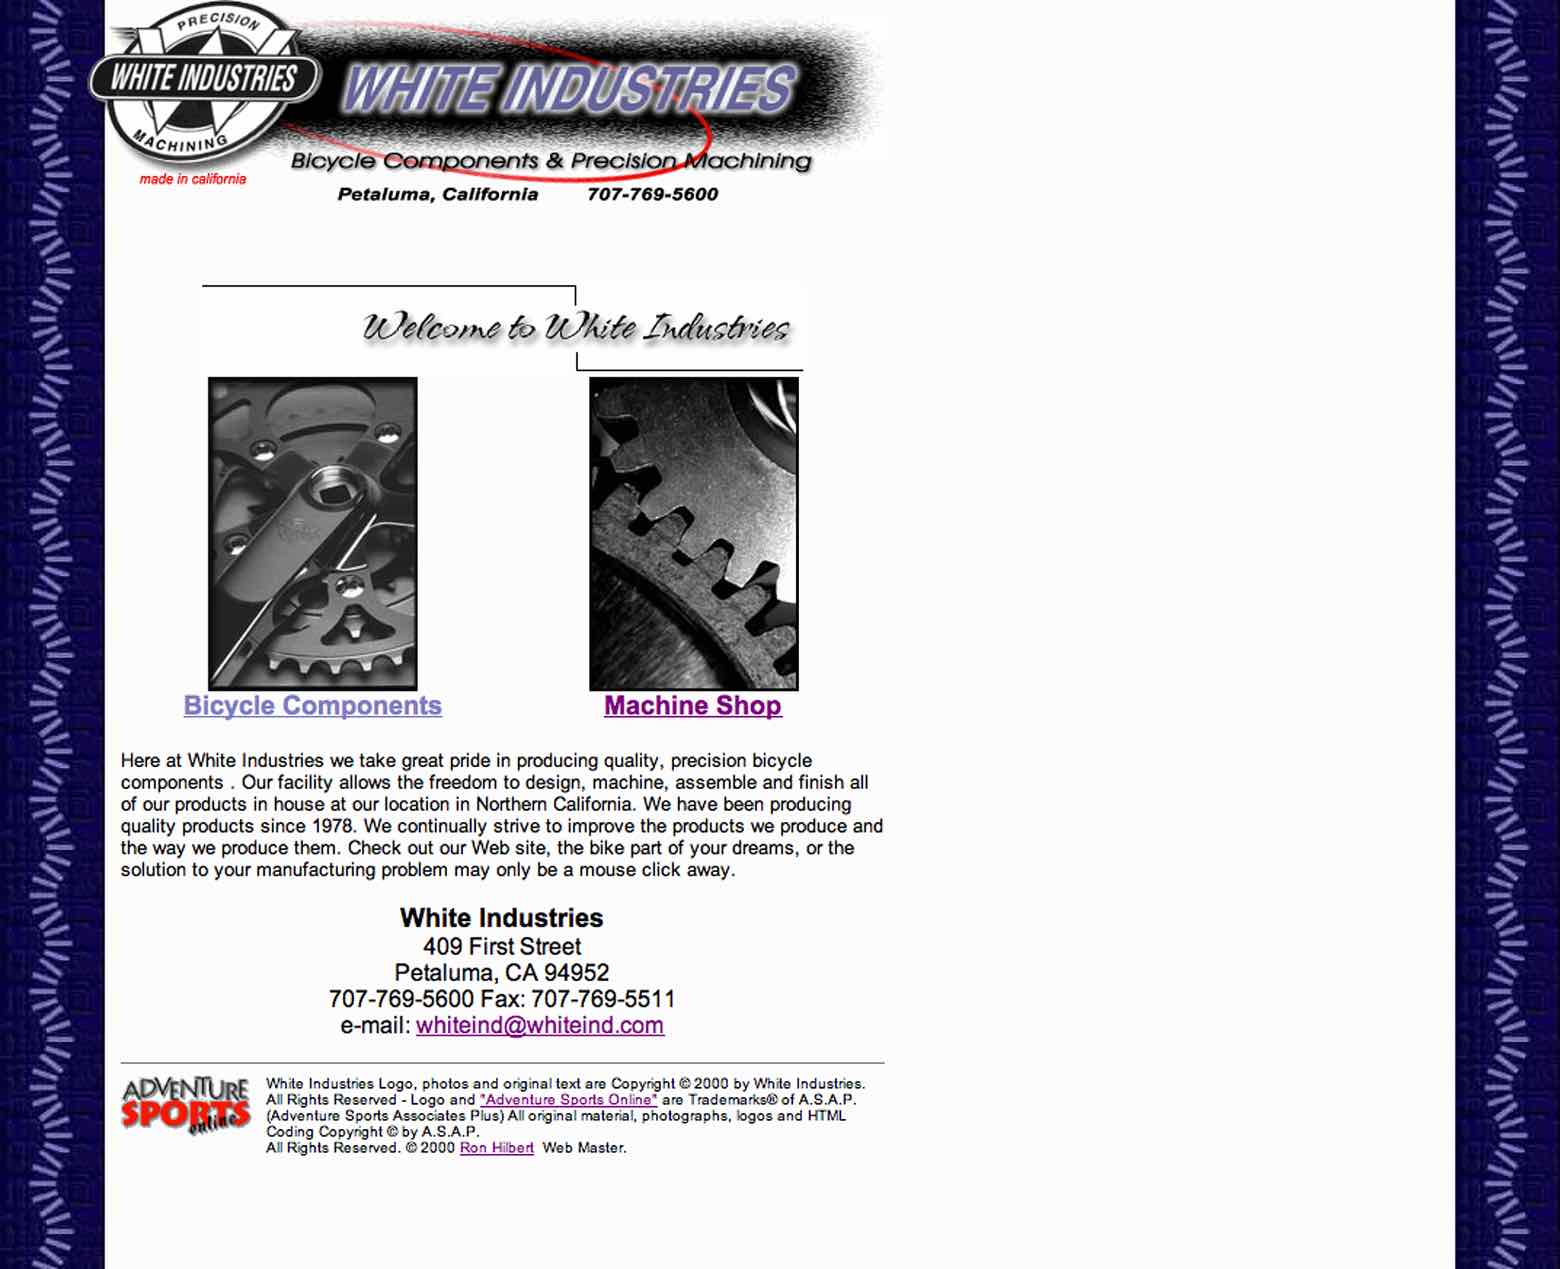 White Industries - web site 2001 image 1 main image